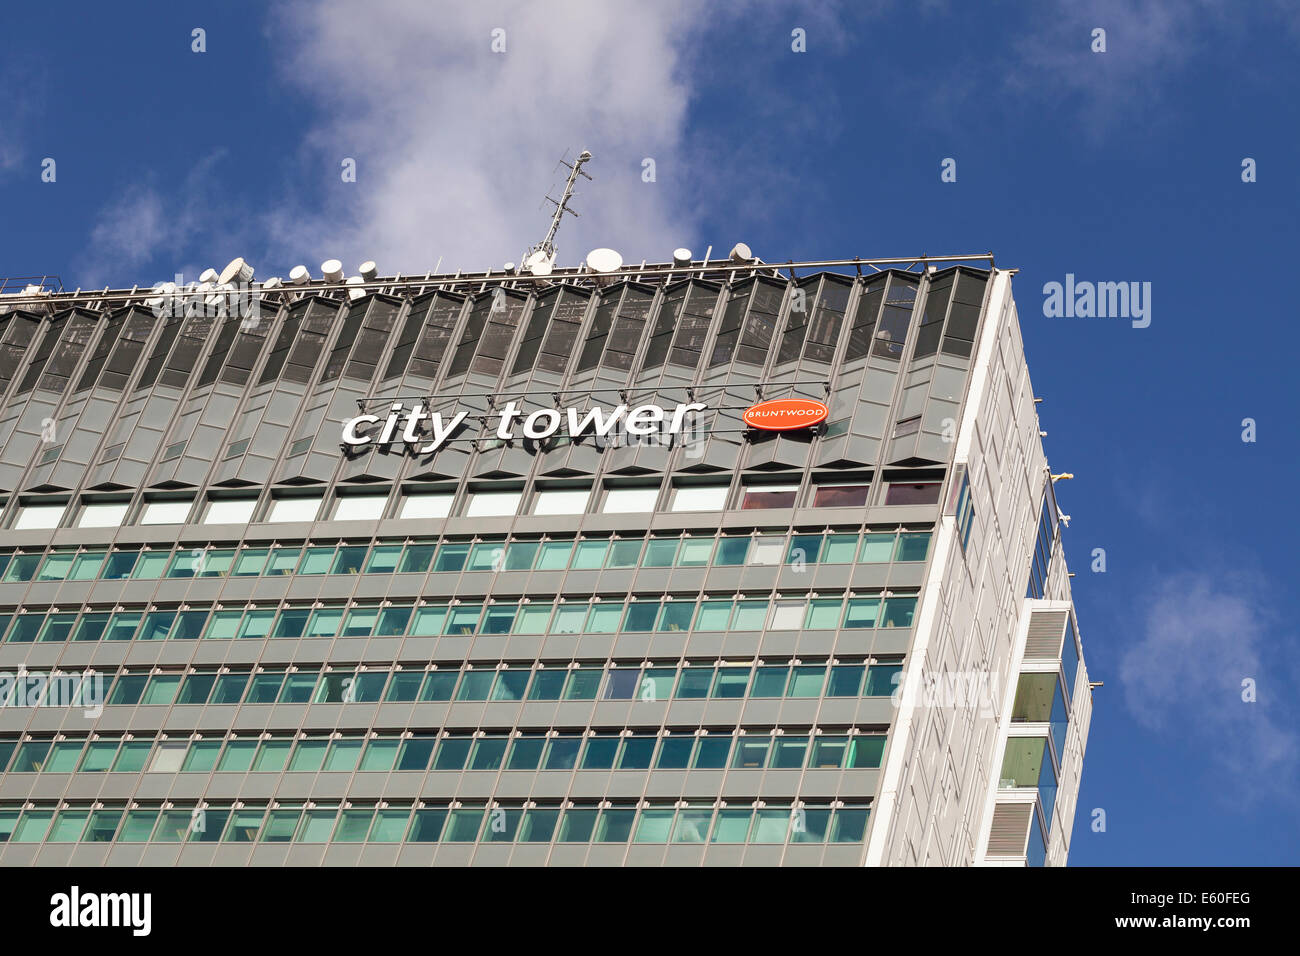 City Tower Building, Manchester, England Stock Photo